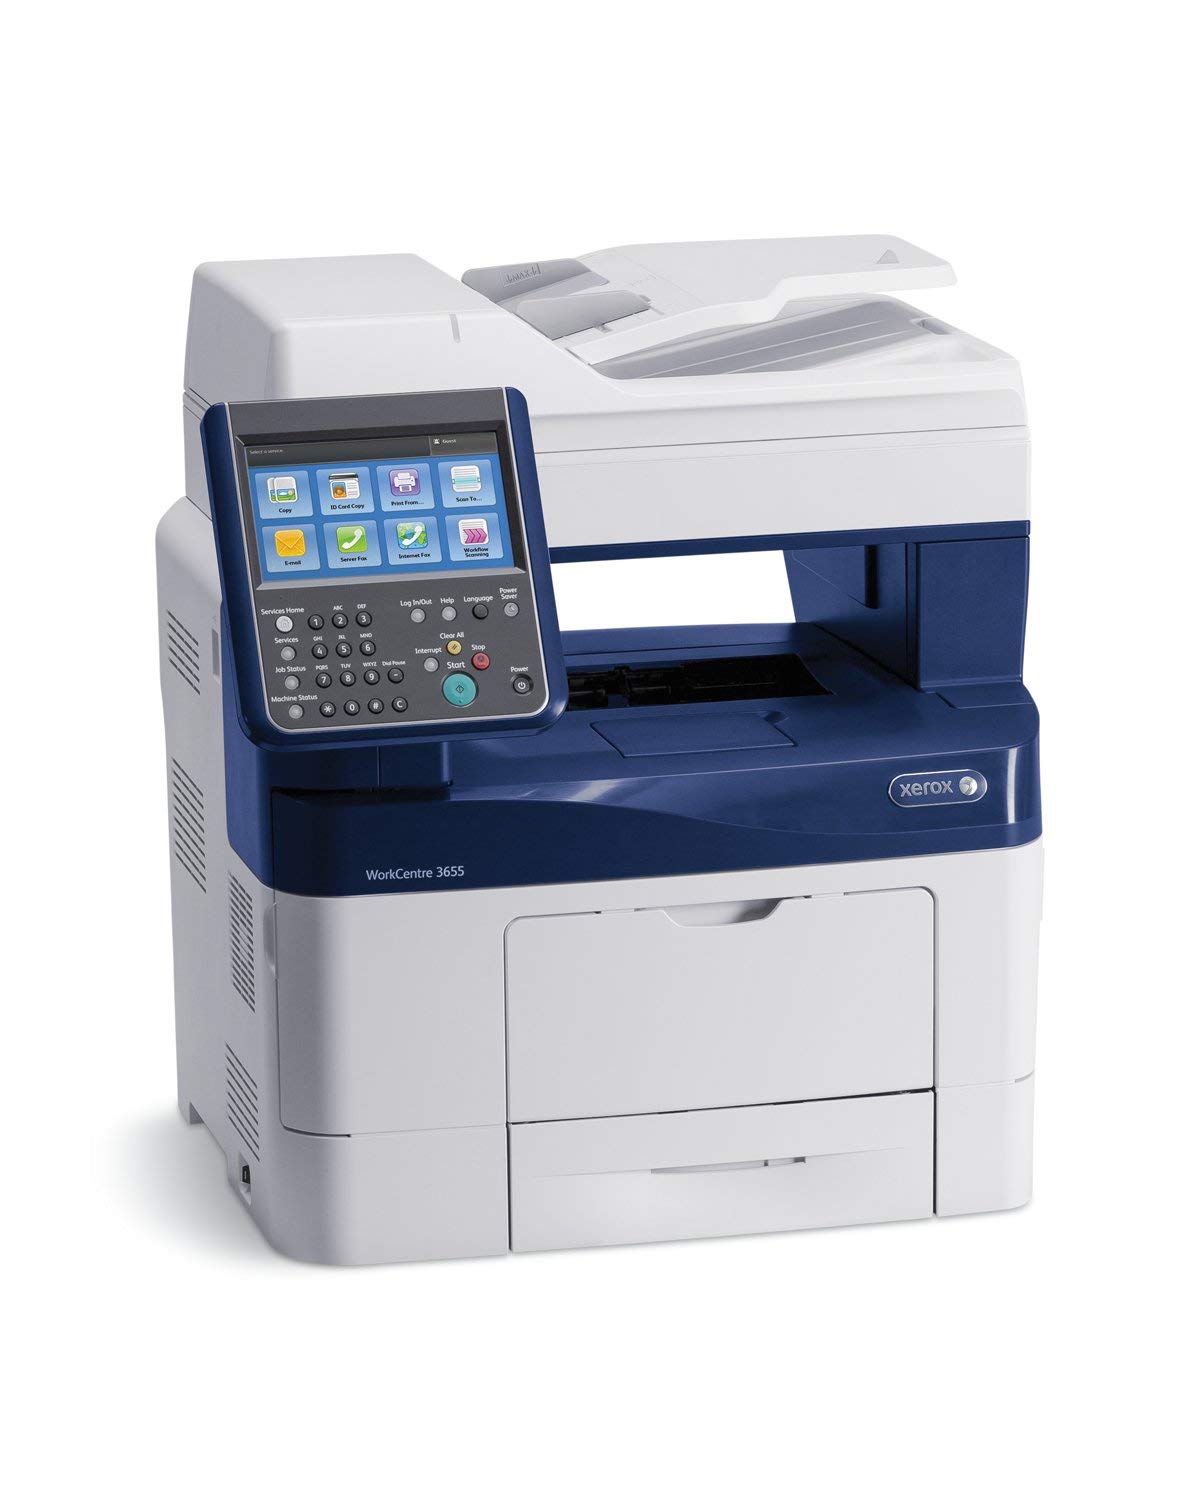 Xerox Work Center 3655 Multifunction LASER BLACK AND WHITE A4 45ppm 1200 x 1200 Duplex Network Front/Back